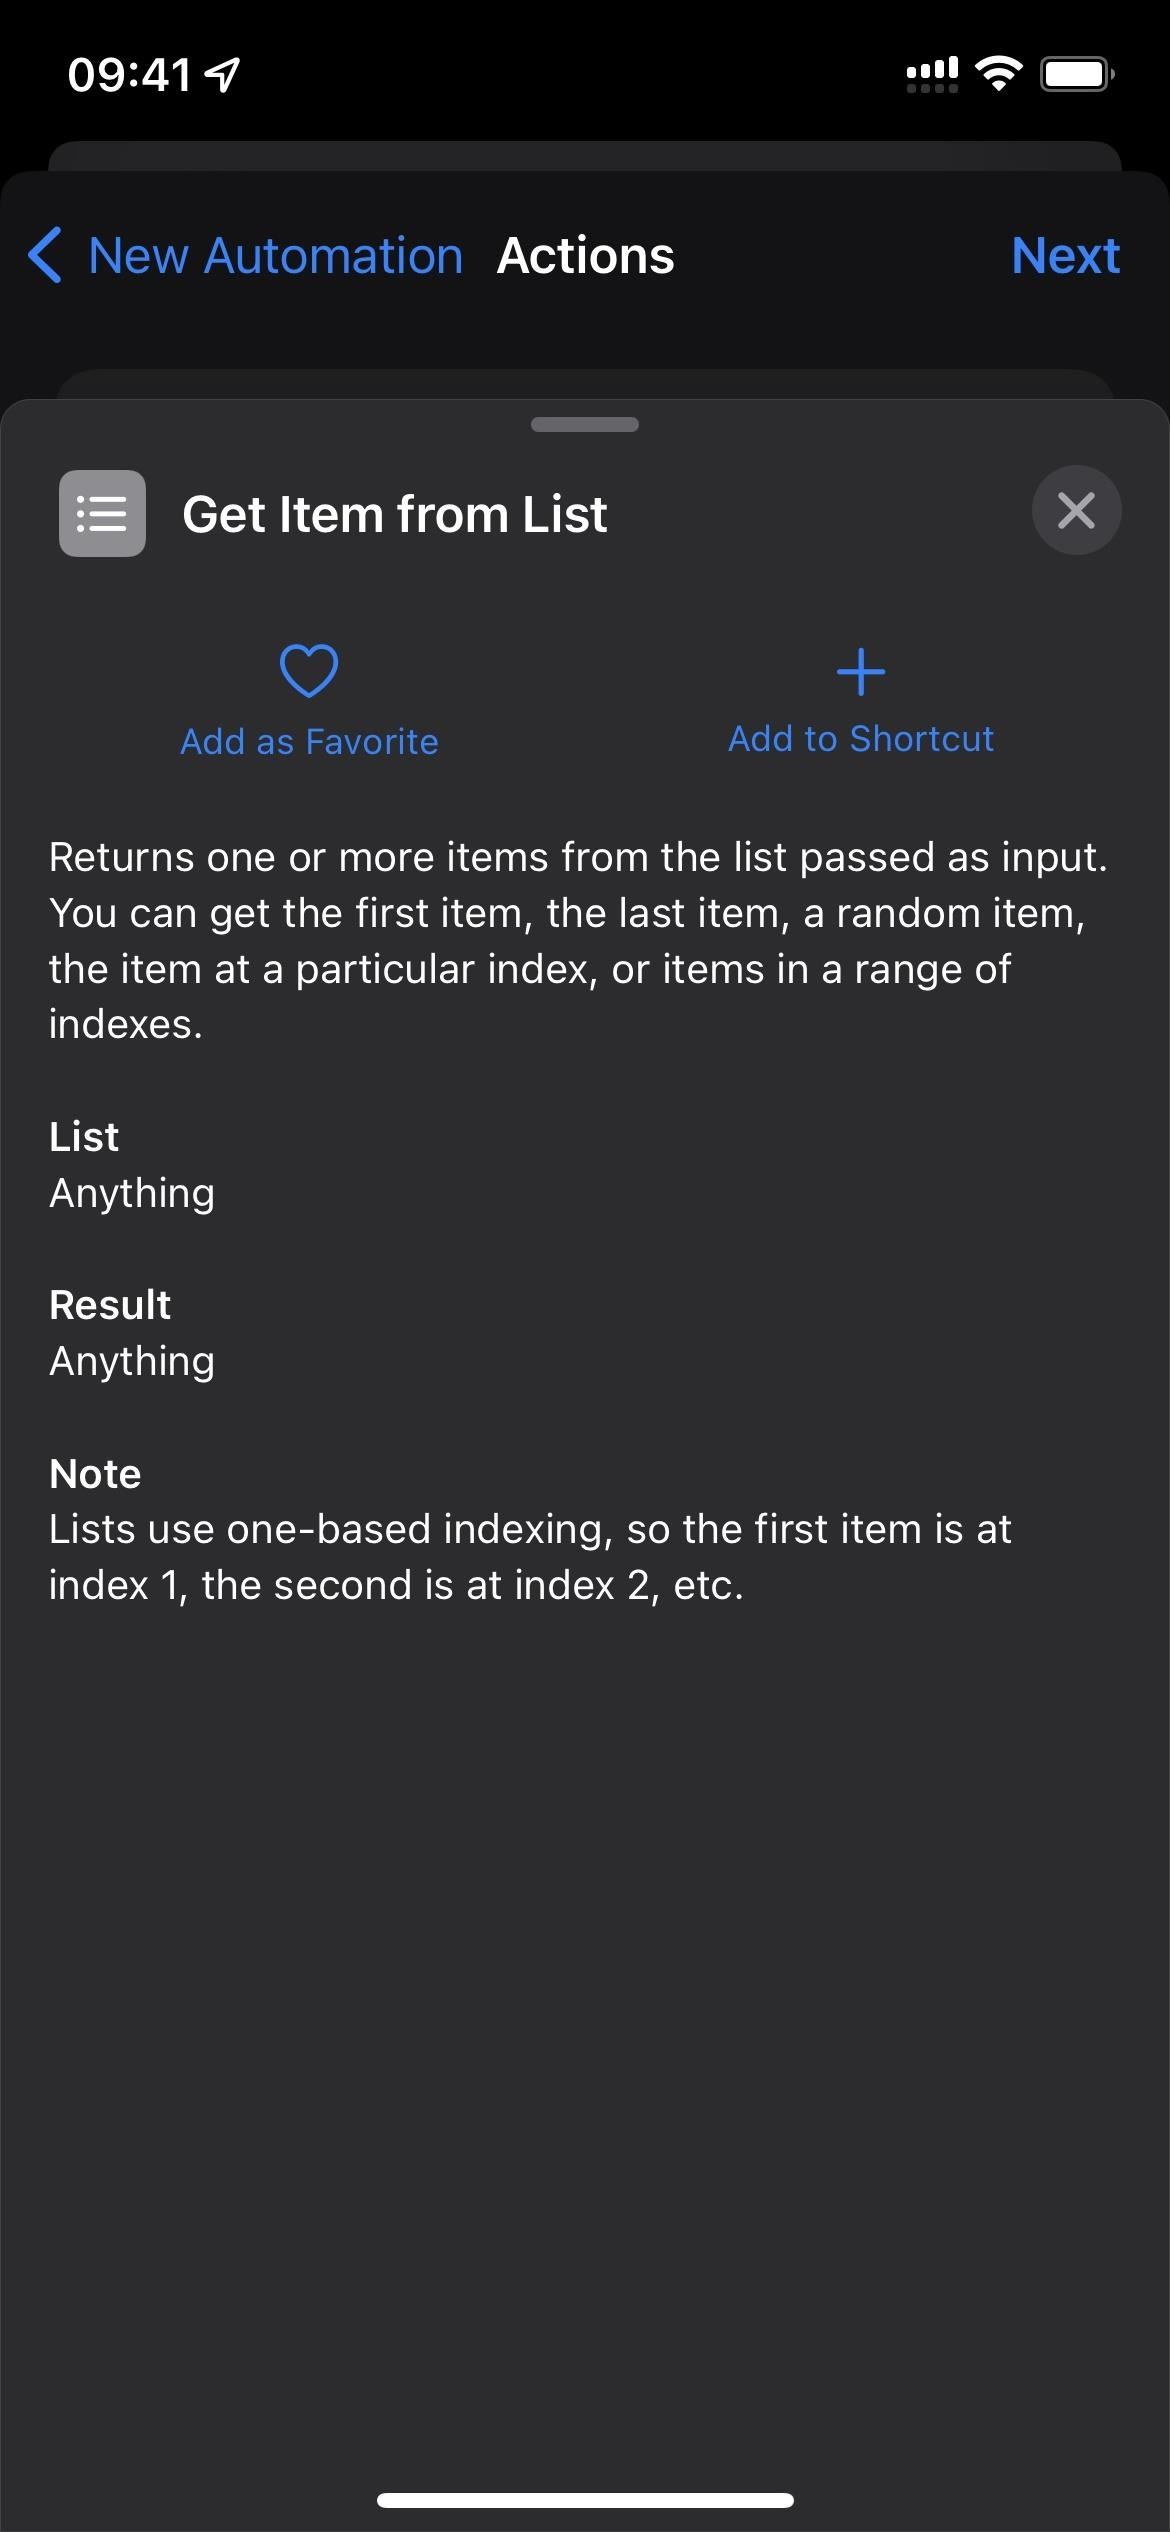 Force Per-App Dark Mode Settings by Bypassing Your iPhone's System-Wide Theme